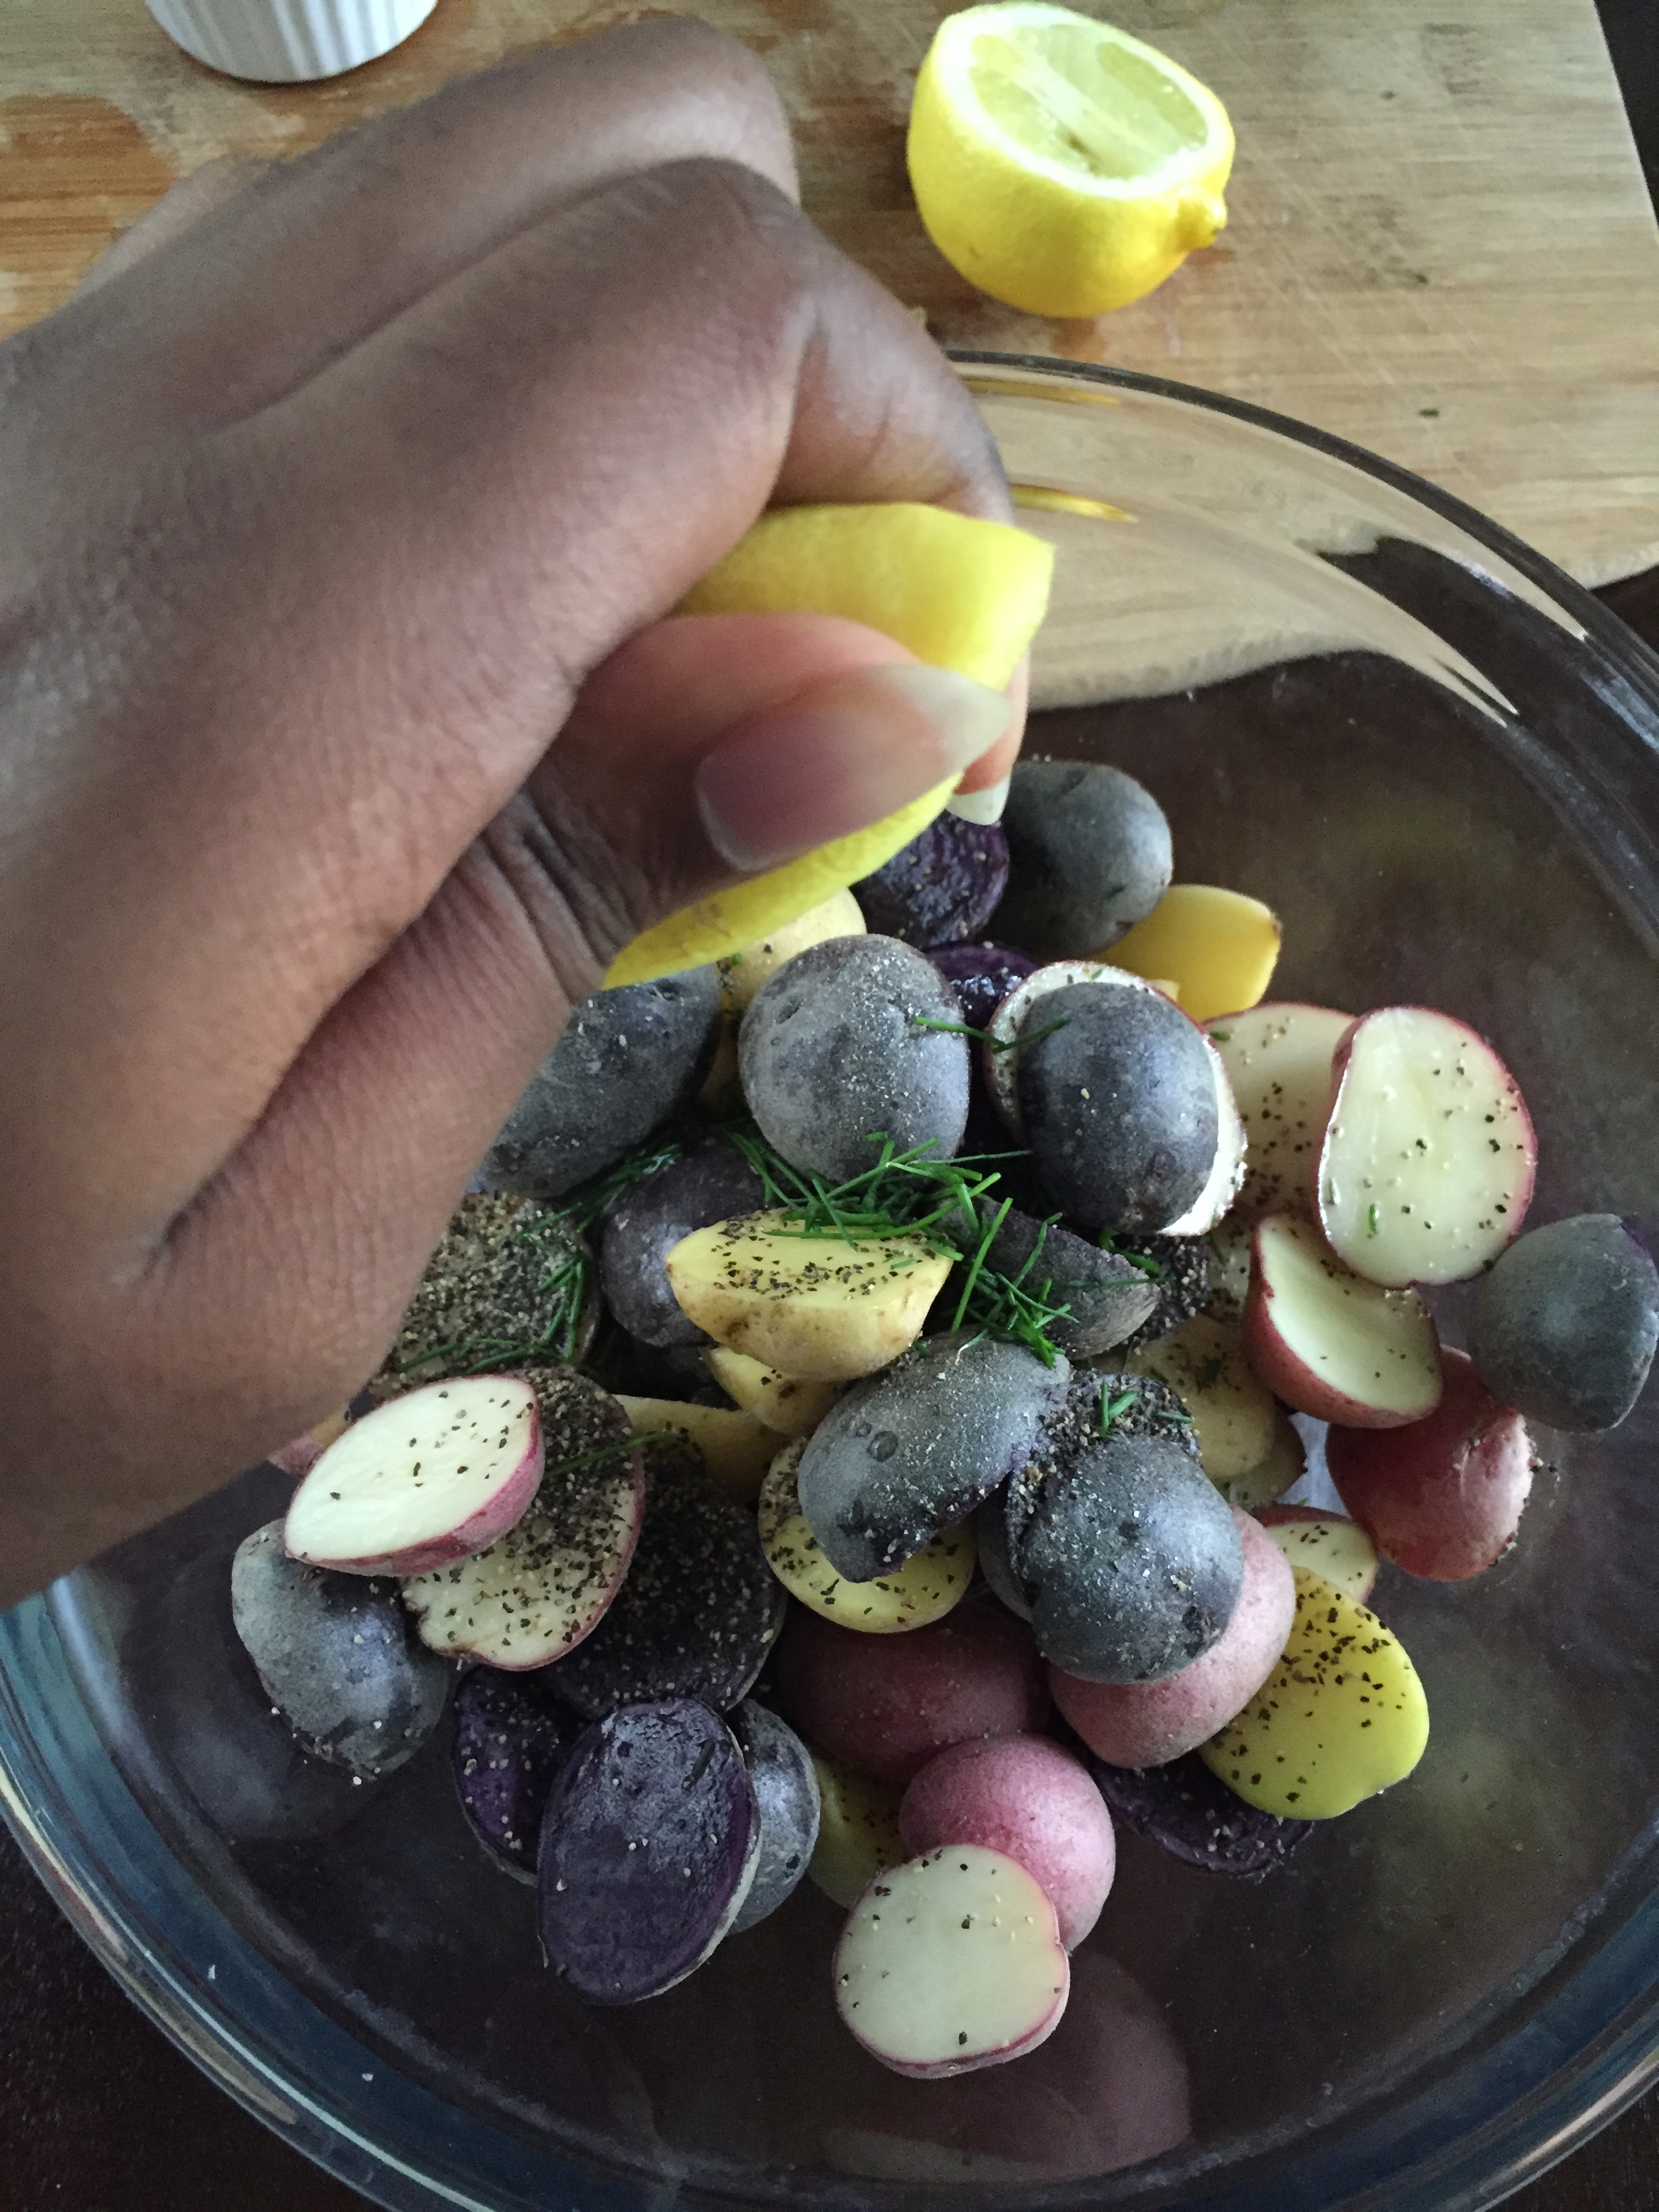 squeezing lemon over mixture of baby potatoes, herbs, and spices